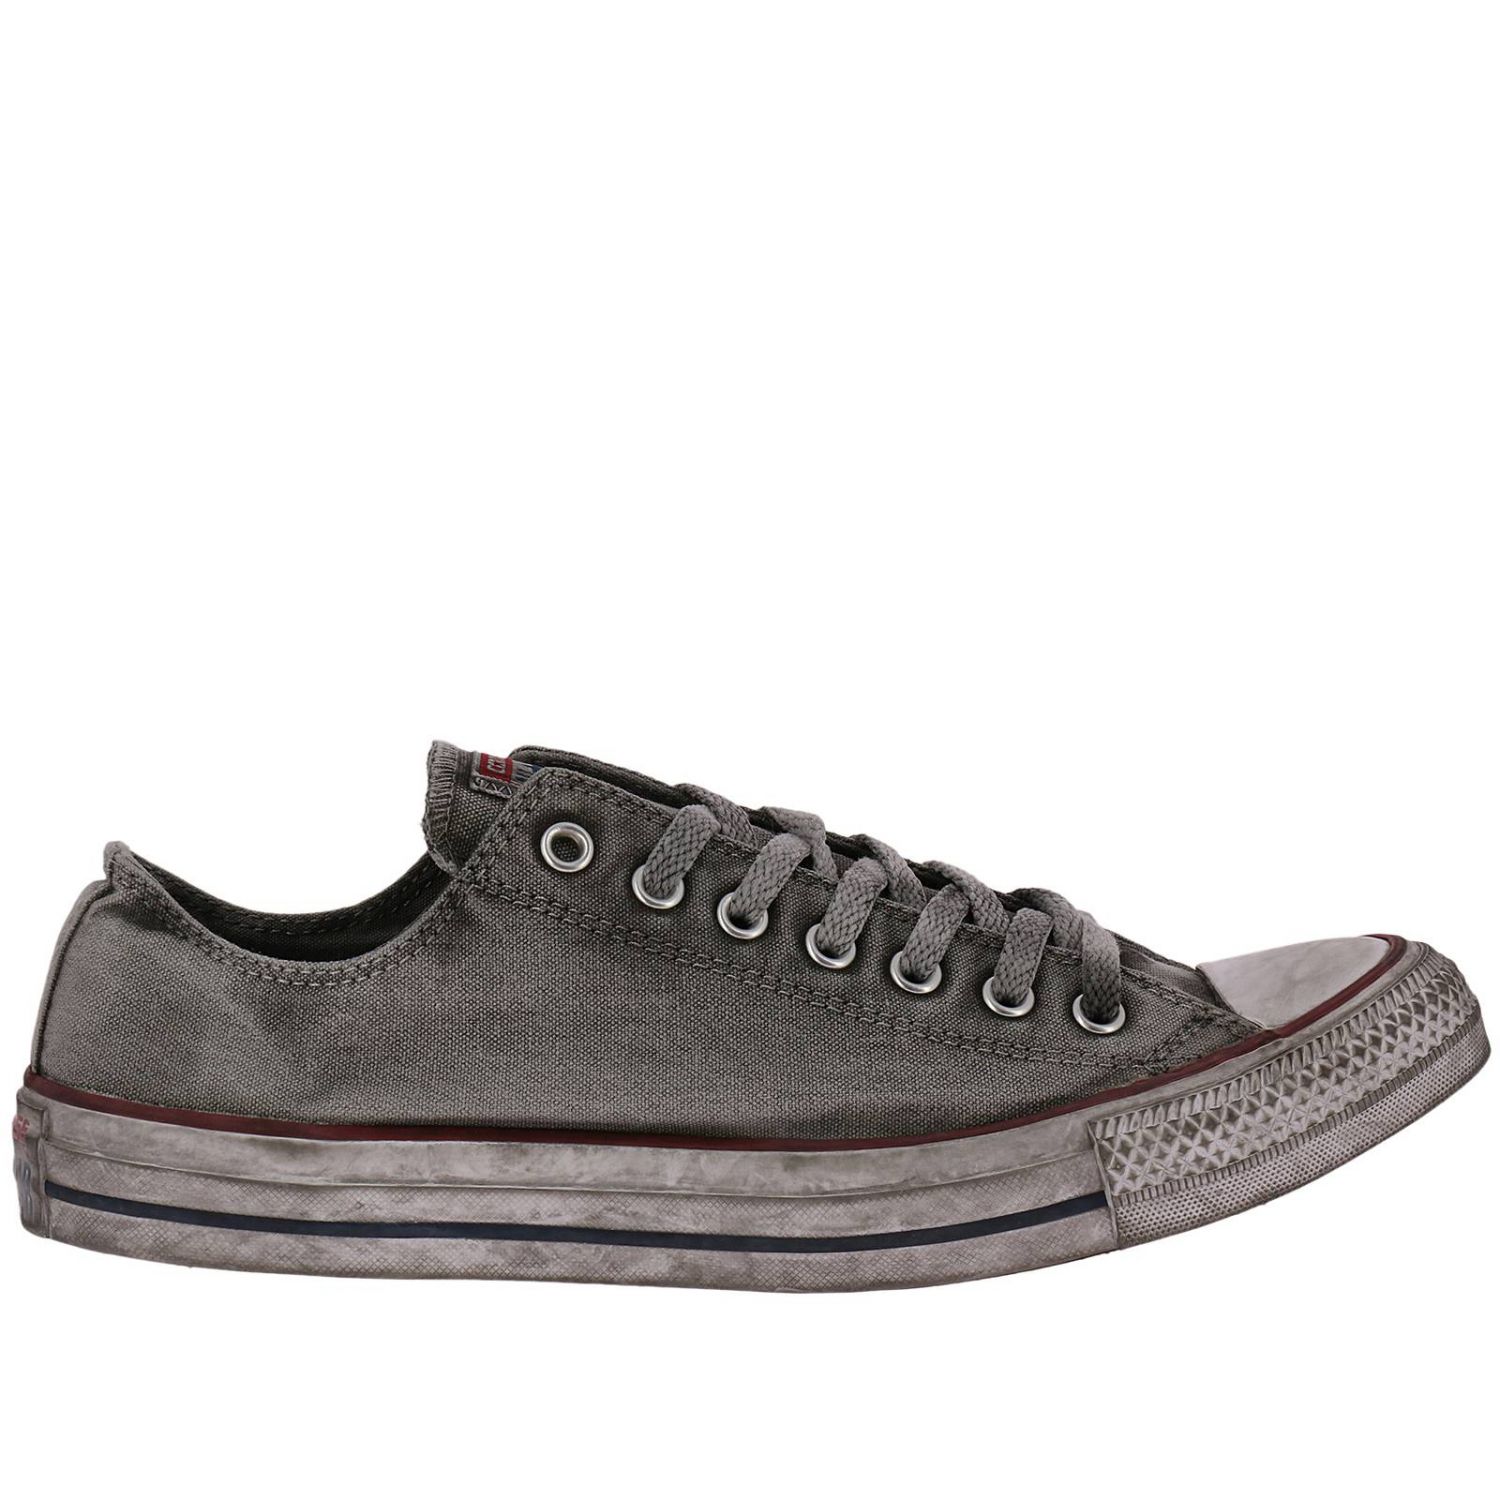 converse basse limited edition